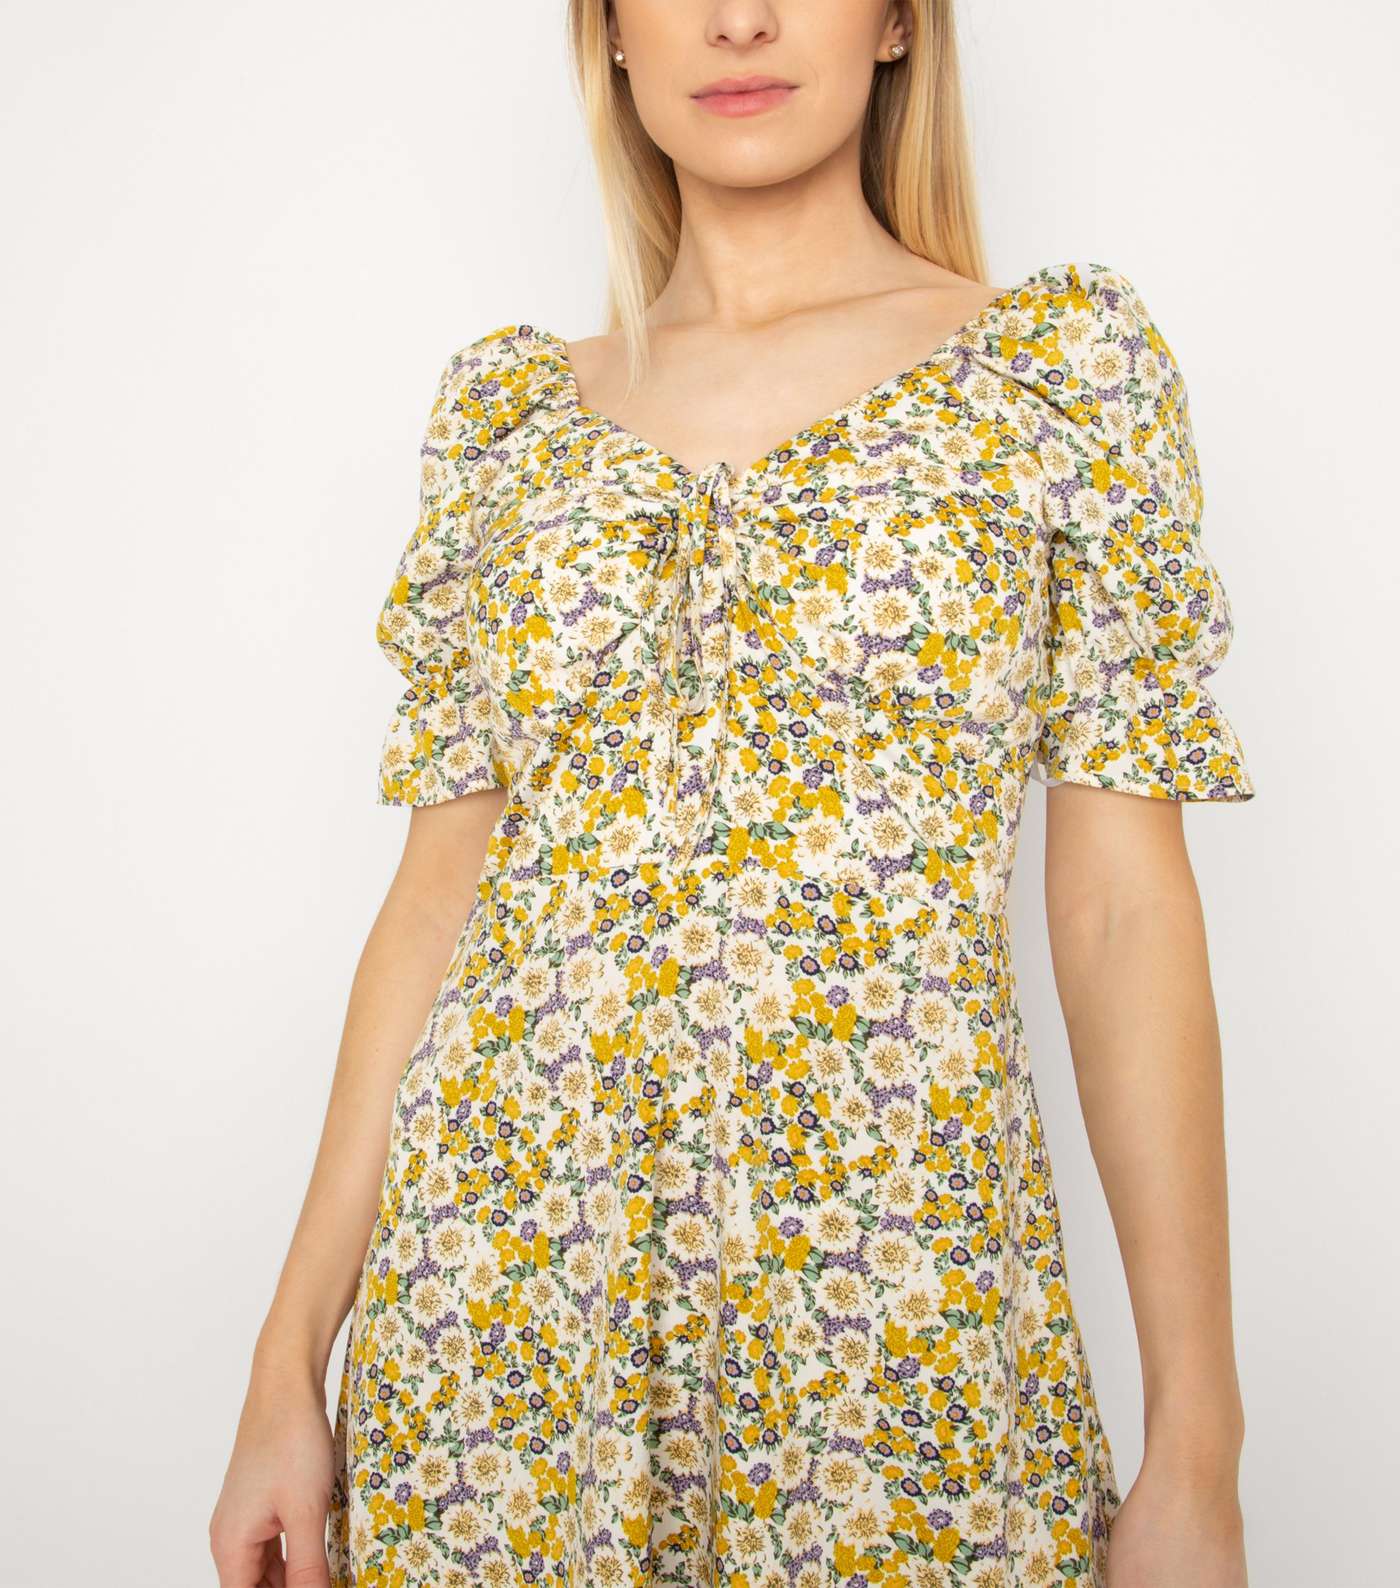 Another Look Yellow Floral Dress Image 5